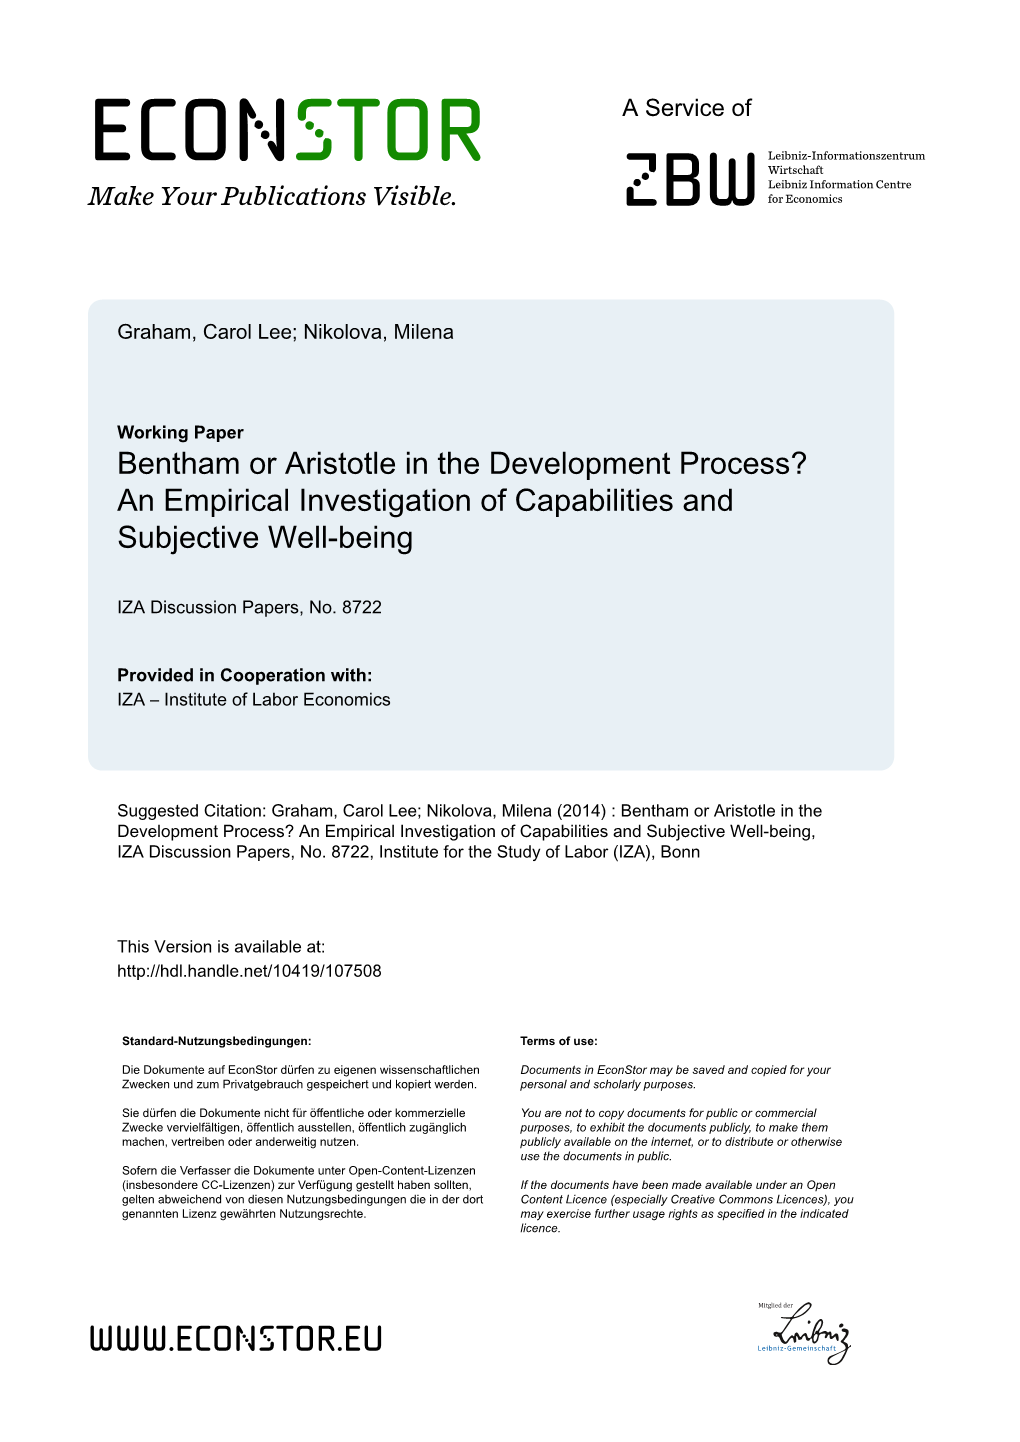 Bentham Or Aristotle in the Development Process? an Empirical Investigation of Capabilities and Subjective Well-Being